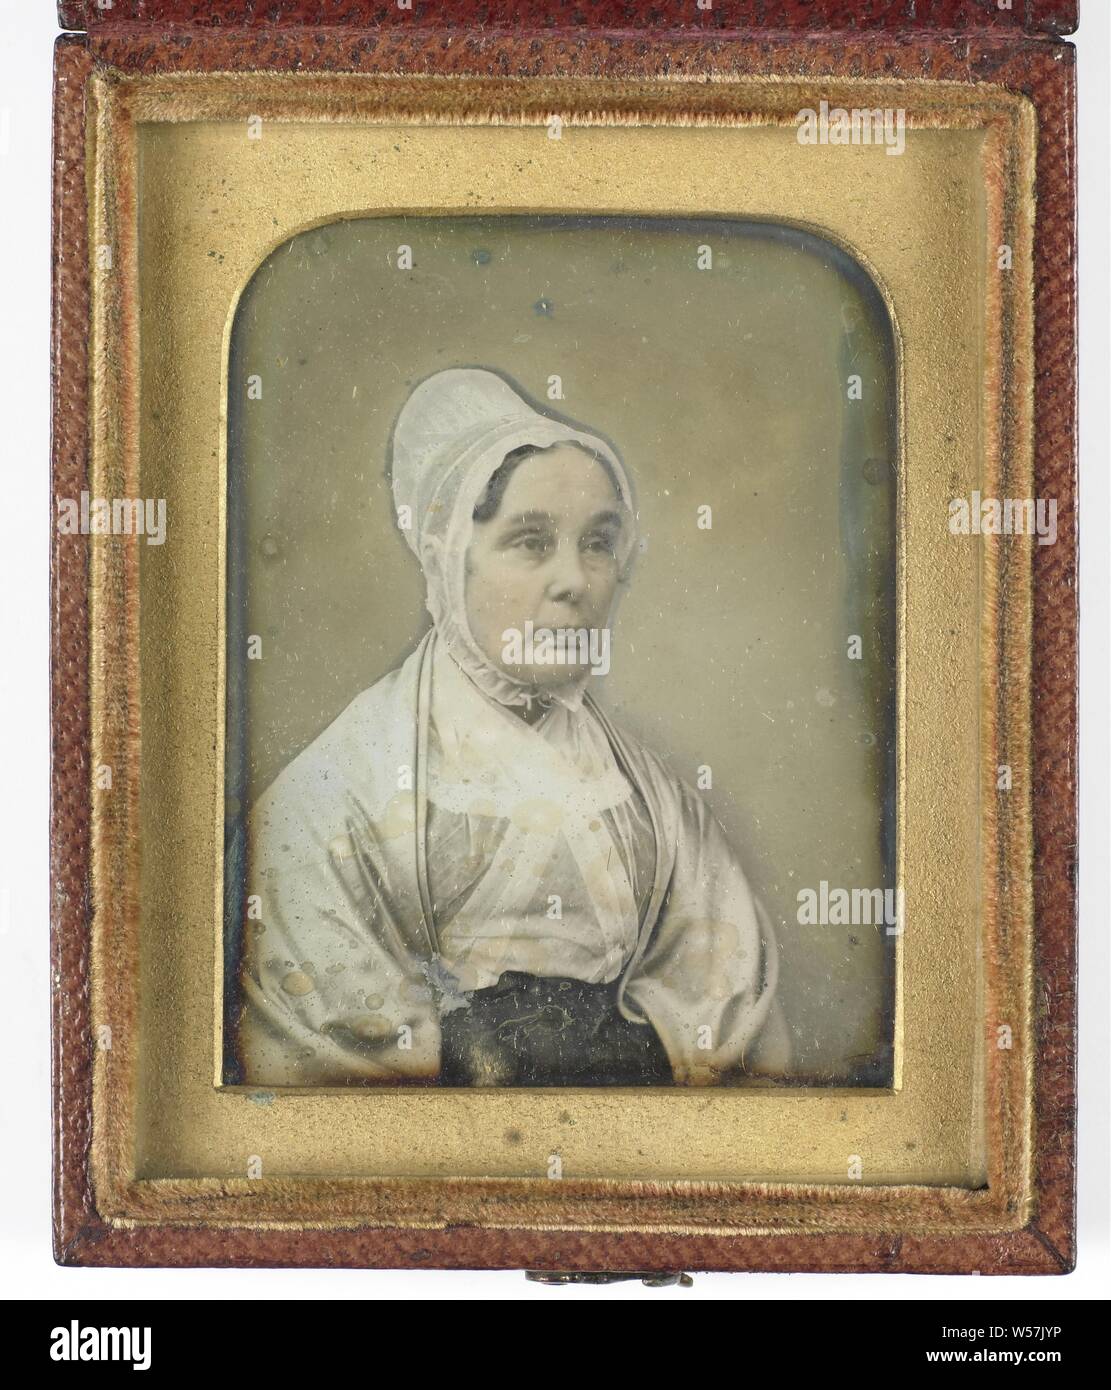 Portrait of an unknown woman in traditional costume, historical persons, adult woman, anonymous, c. 1840 - c. 1860, copper (metal), glass, leather, velvet (fabric weave), h 50 mm × w 38 mm h 70 mm × w 59 mm × t 13 mm Stock Photo